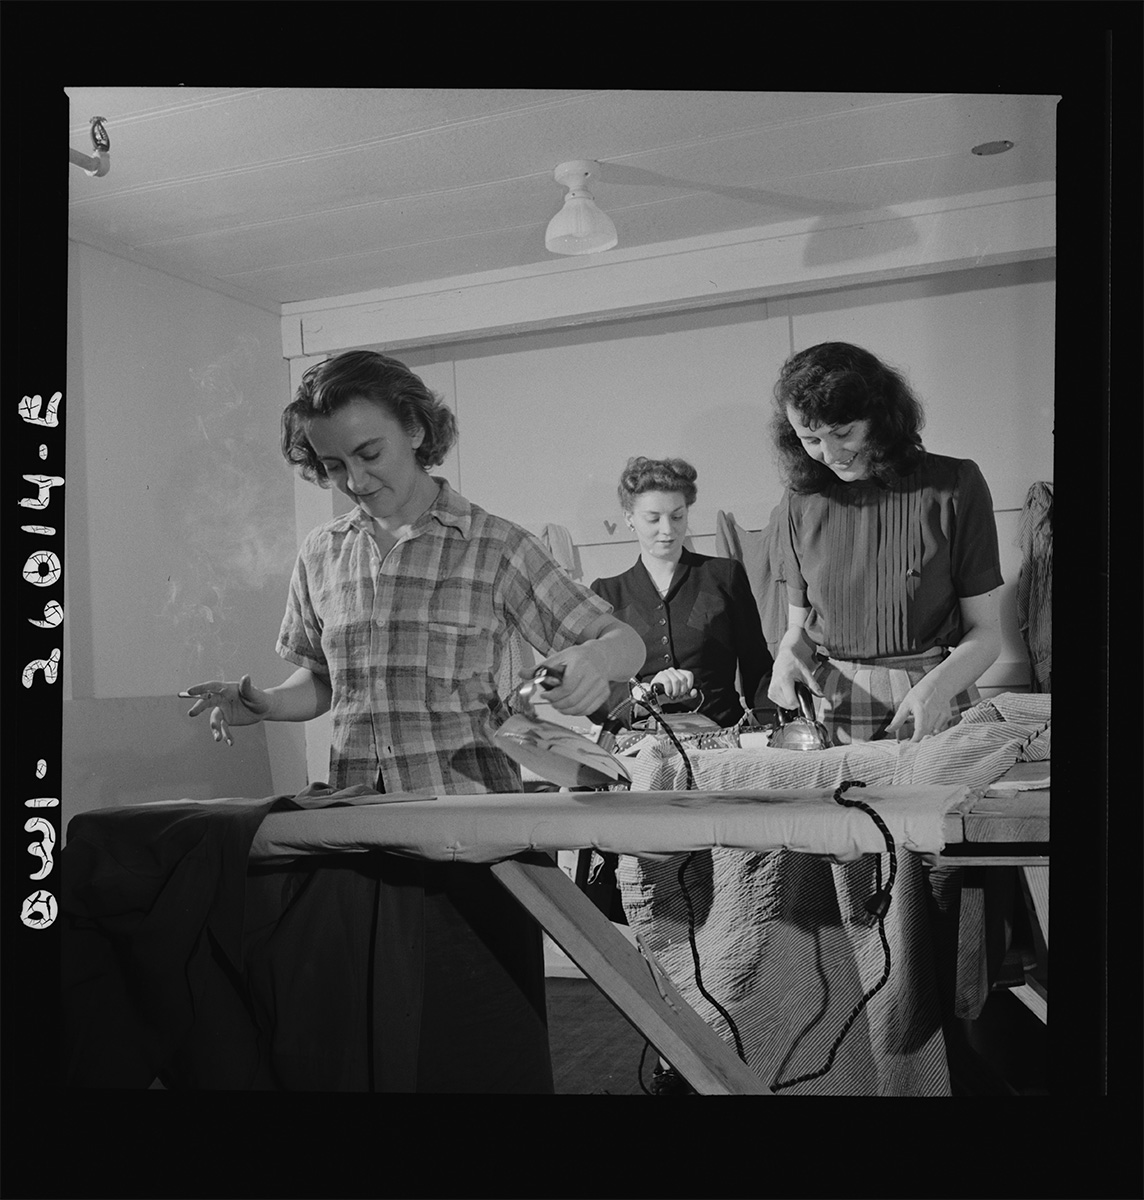 Arlington, Virginia. Ironing in one of the laundry rooms at Idaho Hall, Arlington Farms, a residence for women who work in the U.S. government for the<p>© Esther Bubley</p>